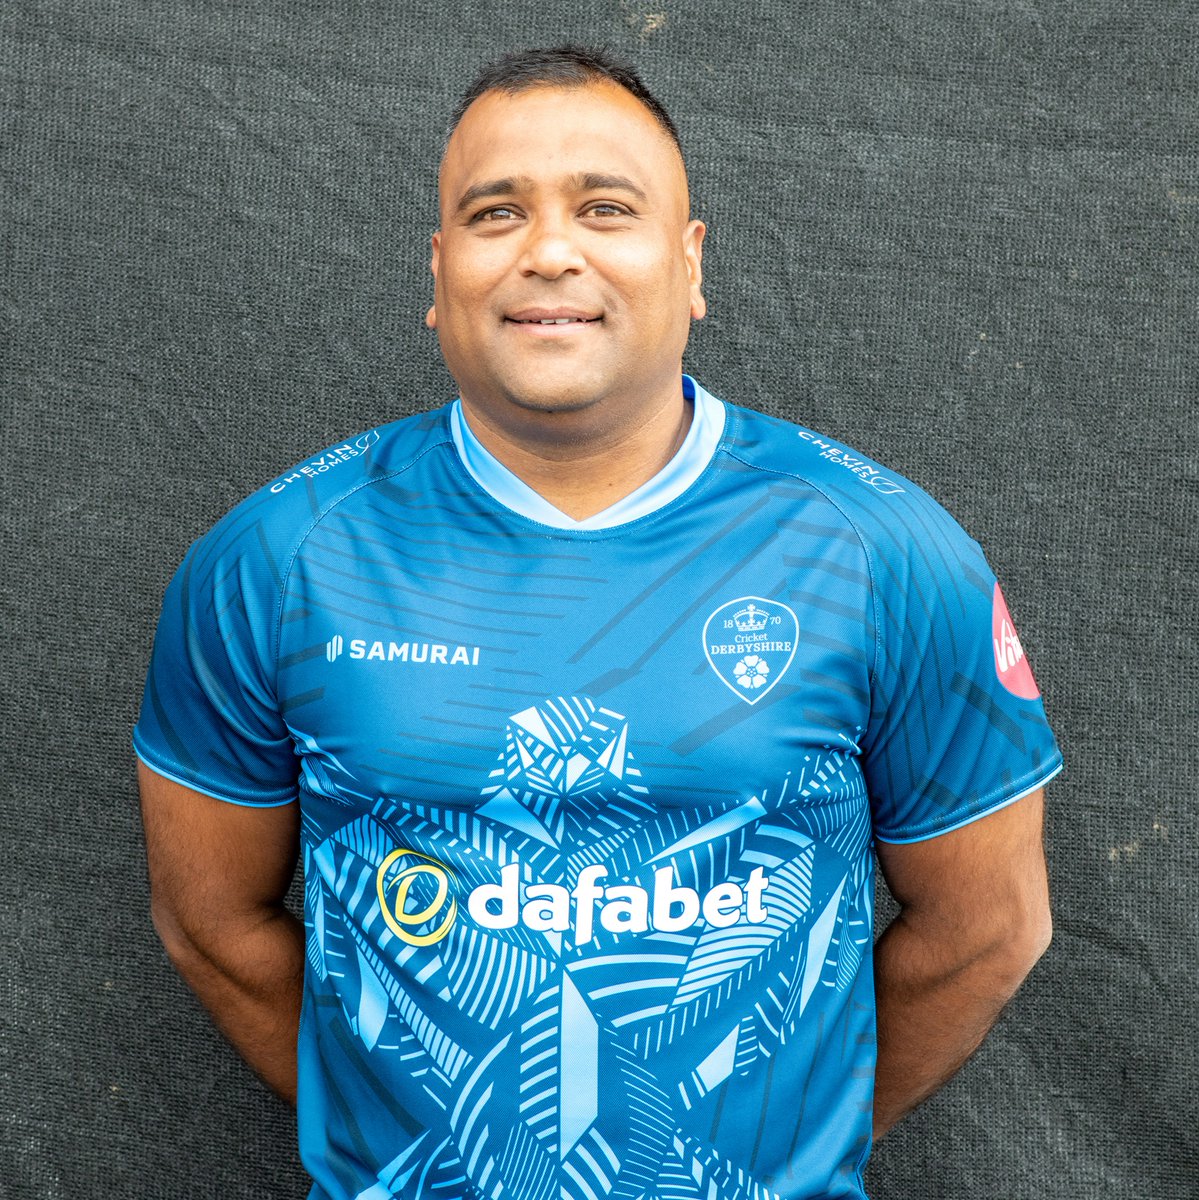 #GriffStatDccc When @Samitpatel21 leads his side out this evening he will become the latest of 28 sets of brothers to play for @DerbyshireCCC following Akhil's appearance for the county in 2007. Both also played for @TrentBridge_1 @ACScricket